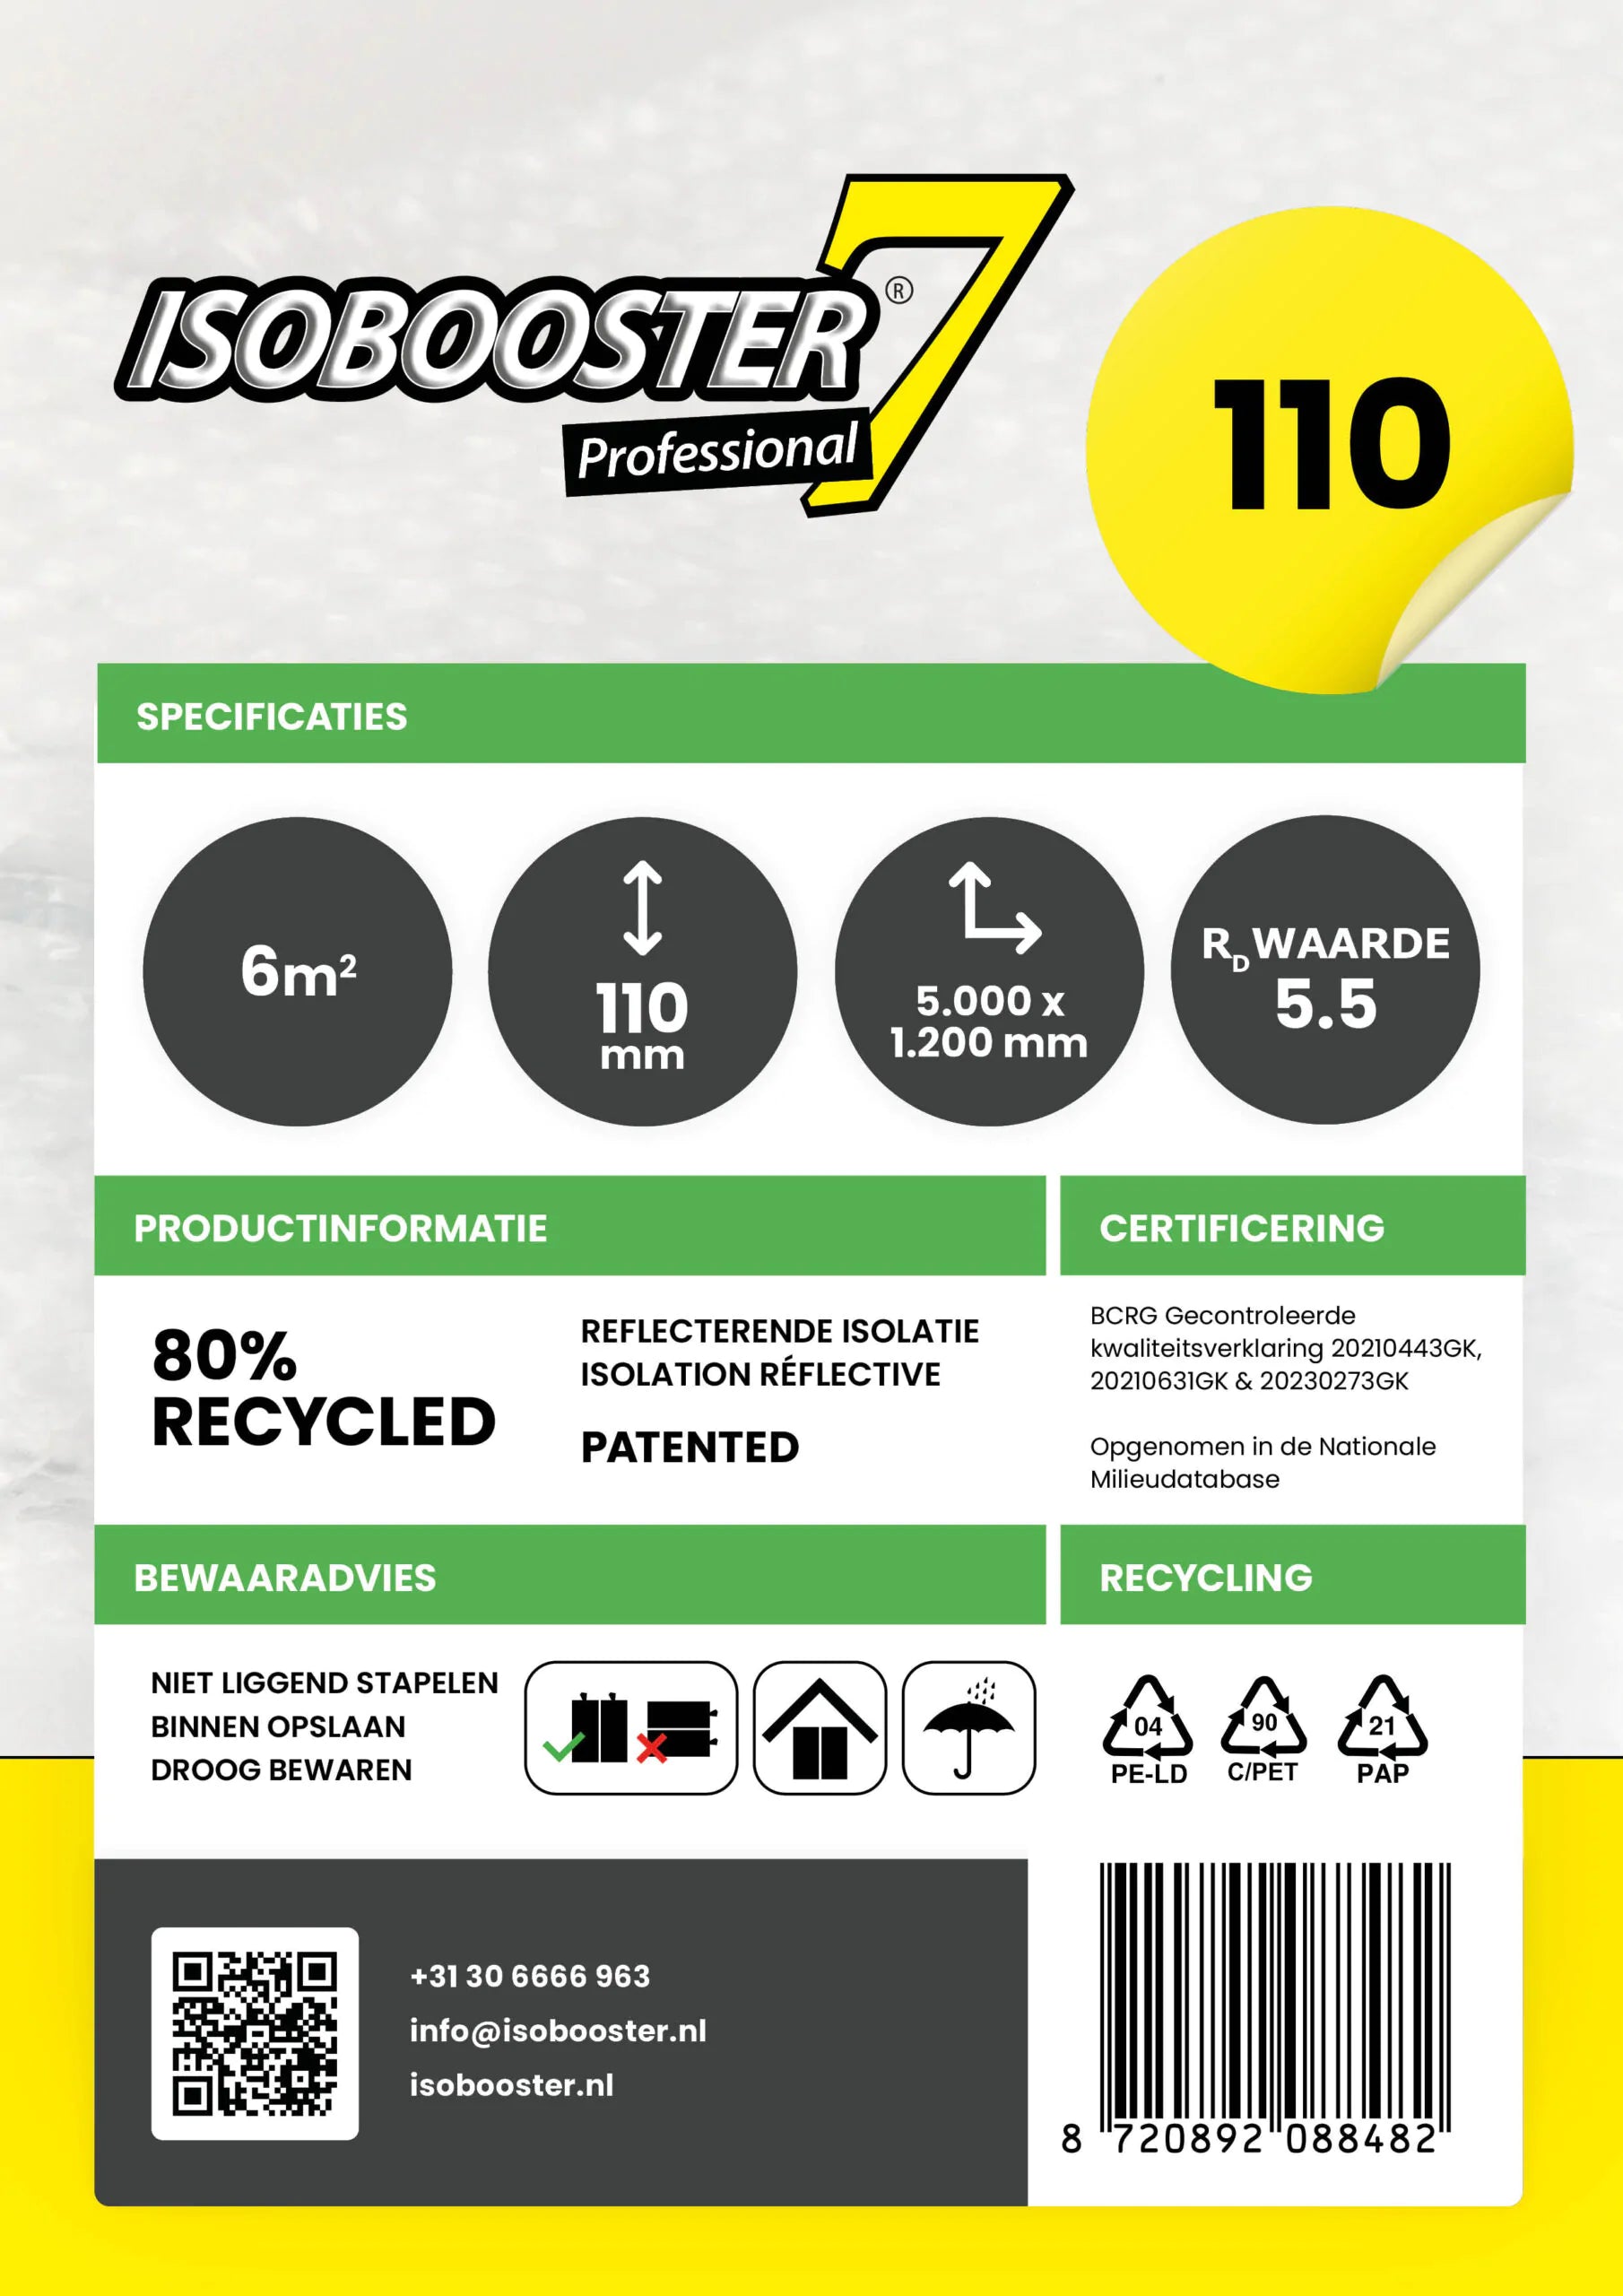 Isobooster Professionnel 110mm